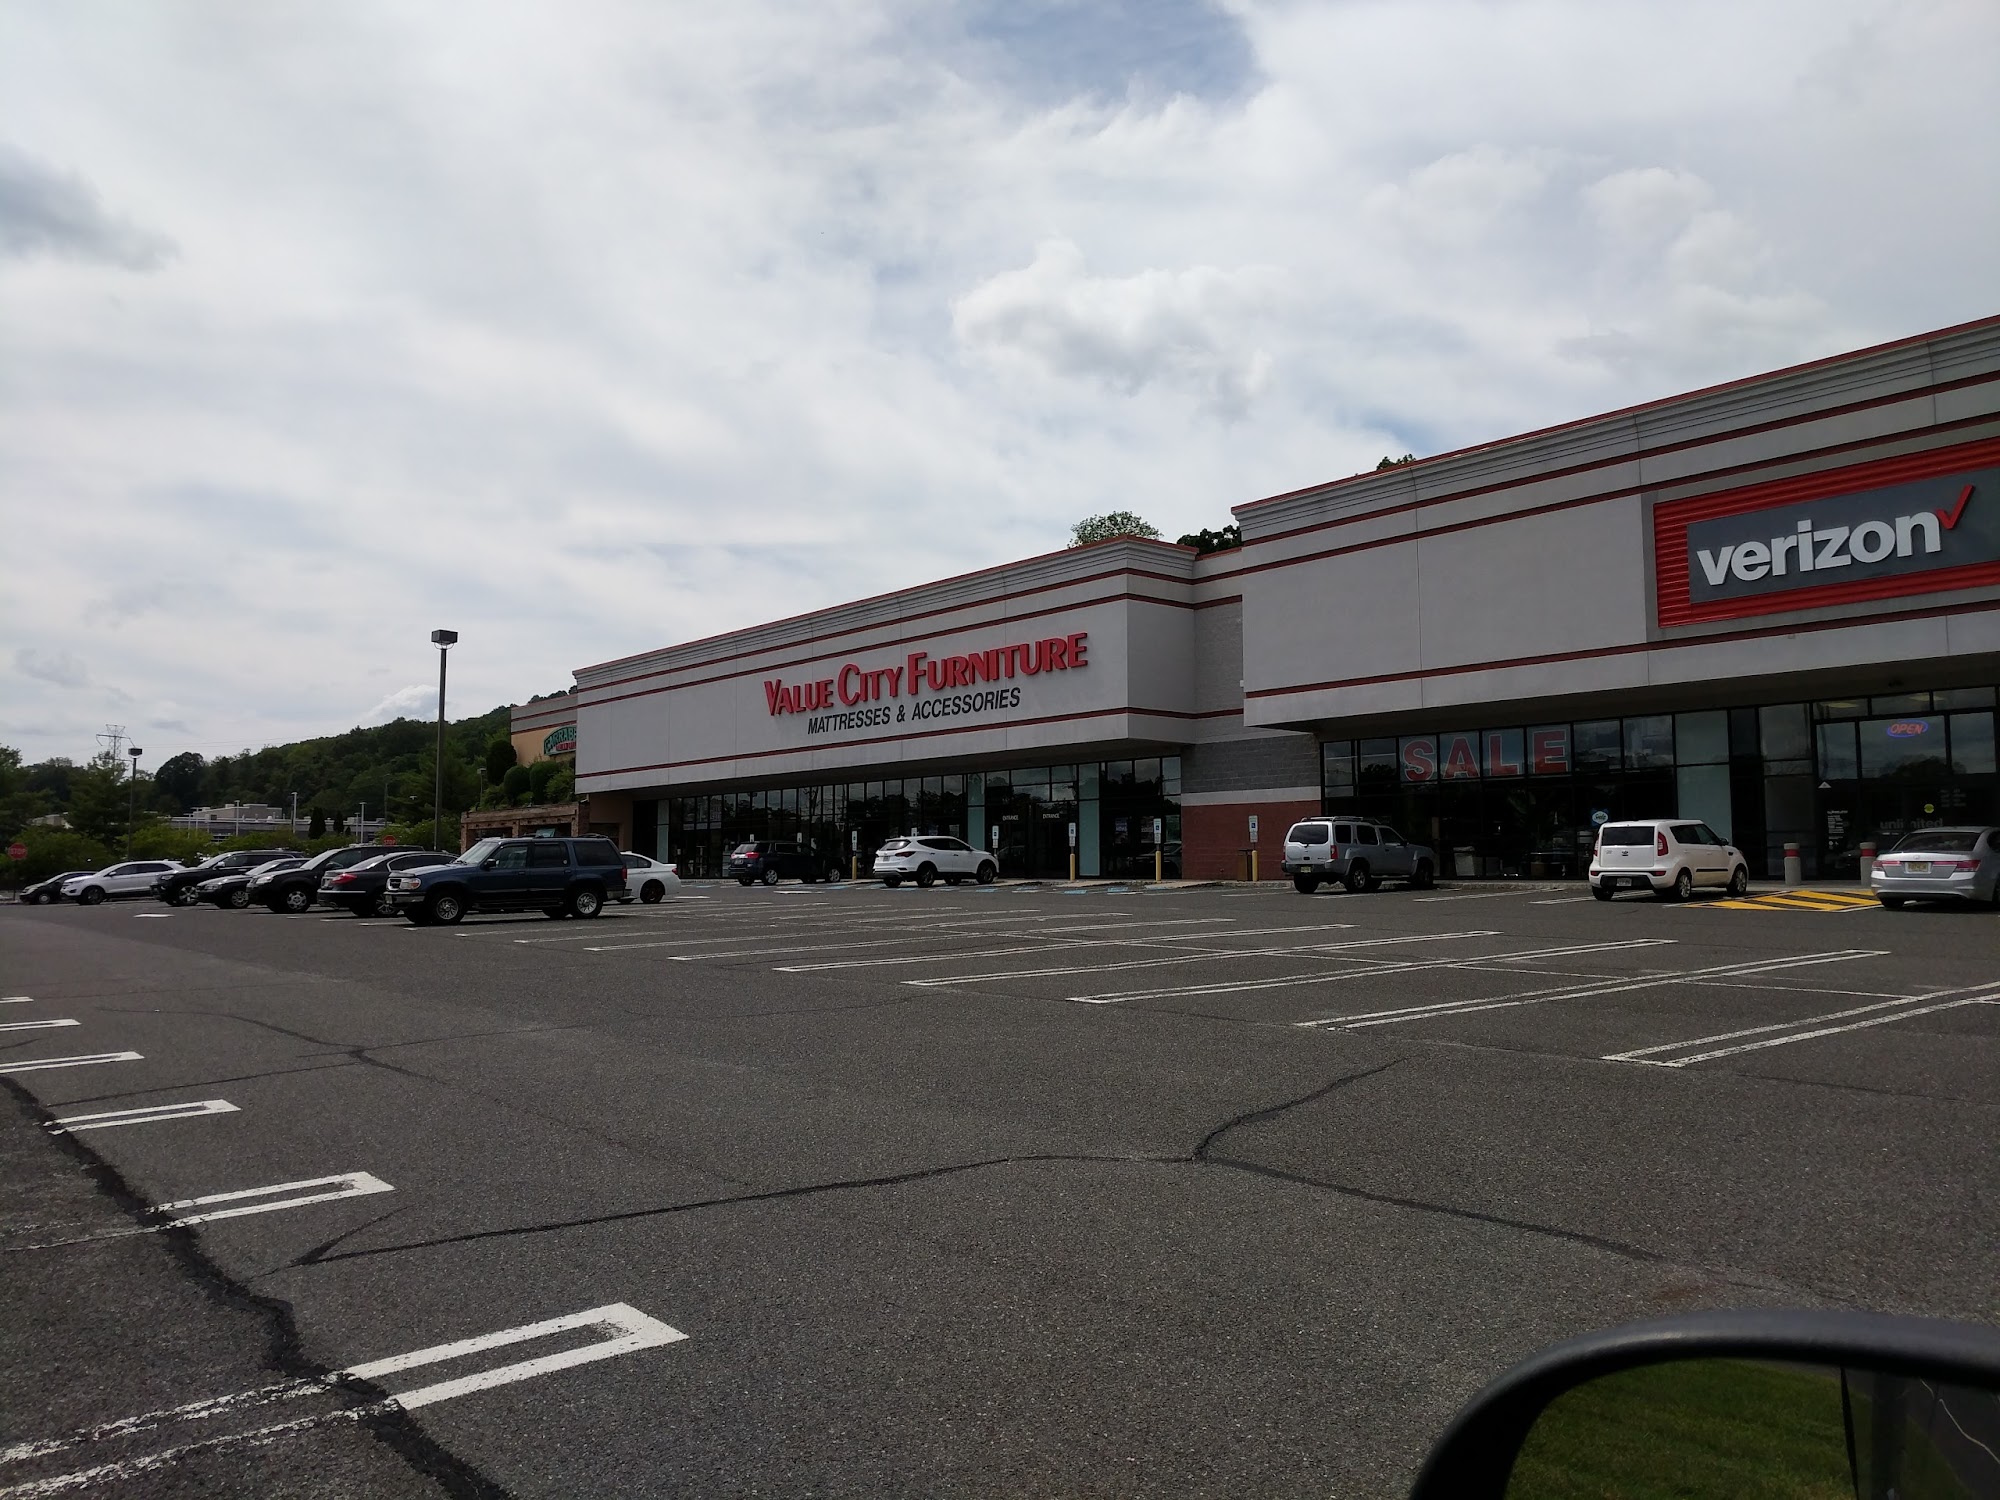 Value City of New Jersey